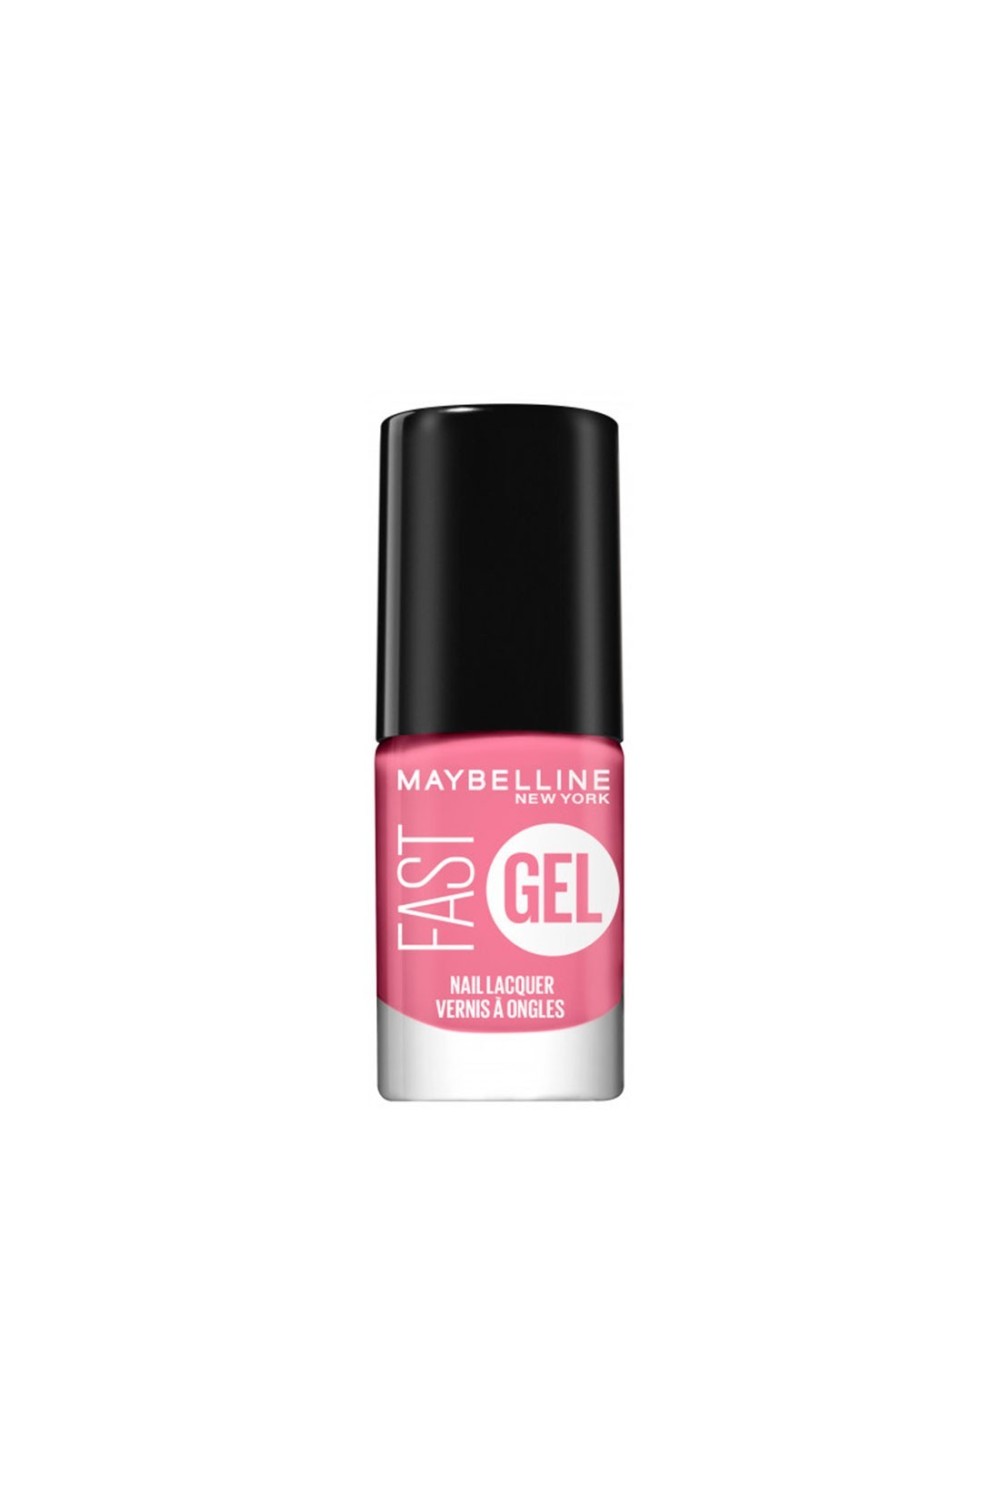 Maybelline Fast Gel Nail Lacquer 05-Twisted Tulip